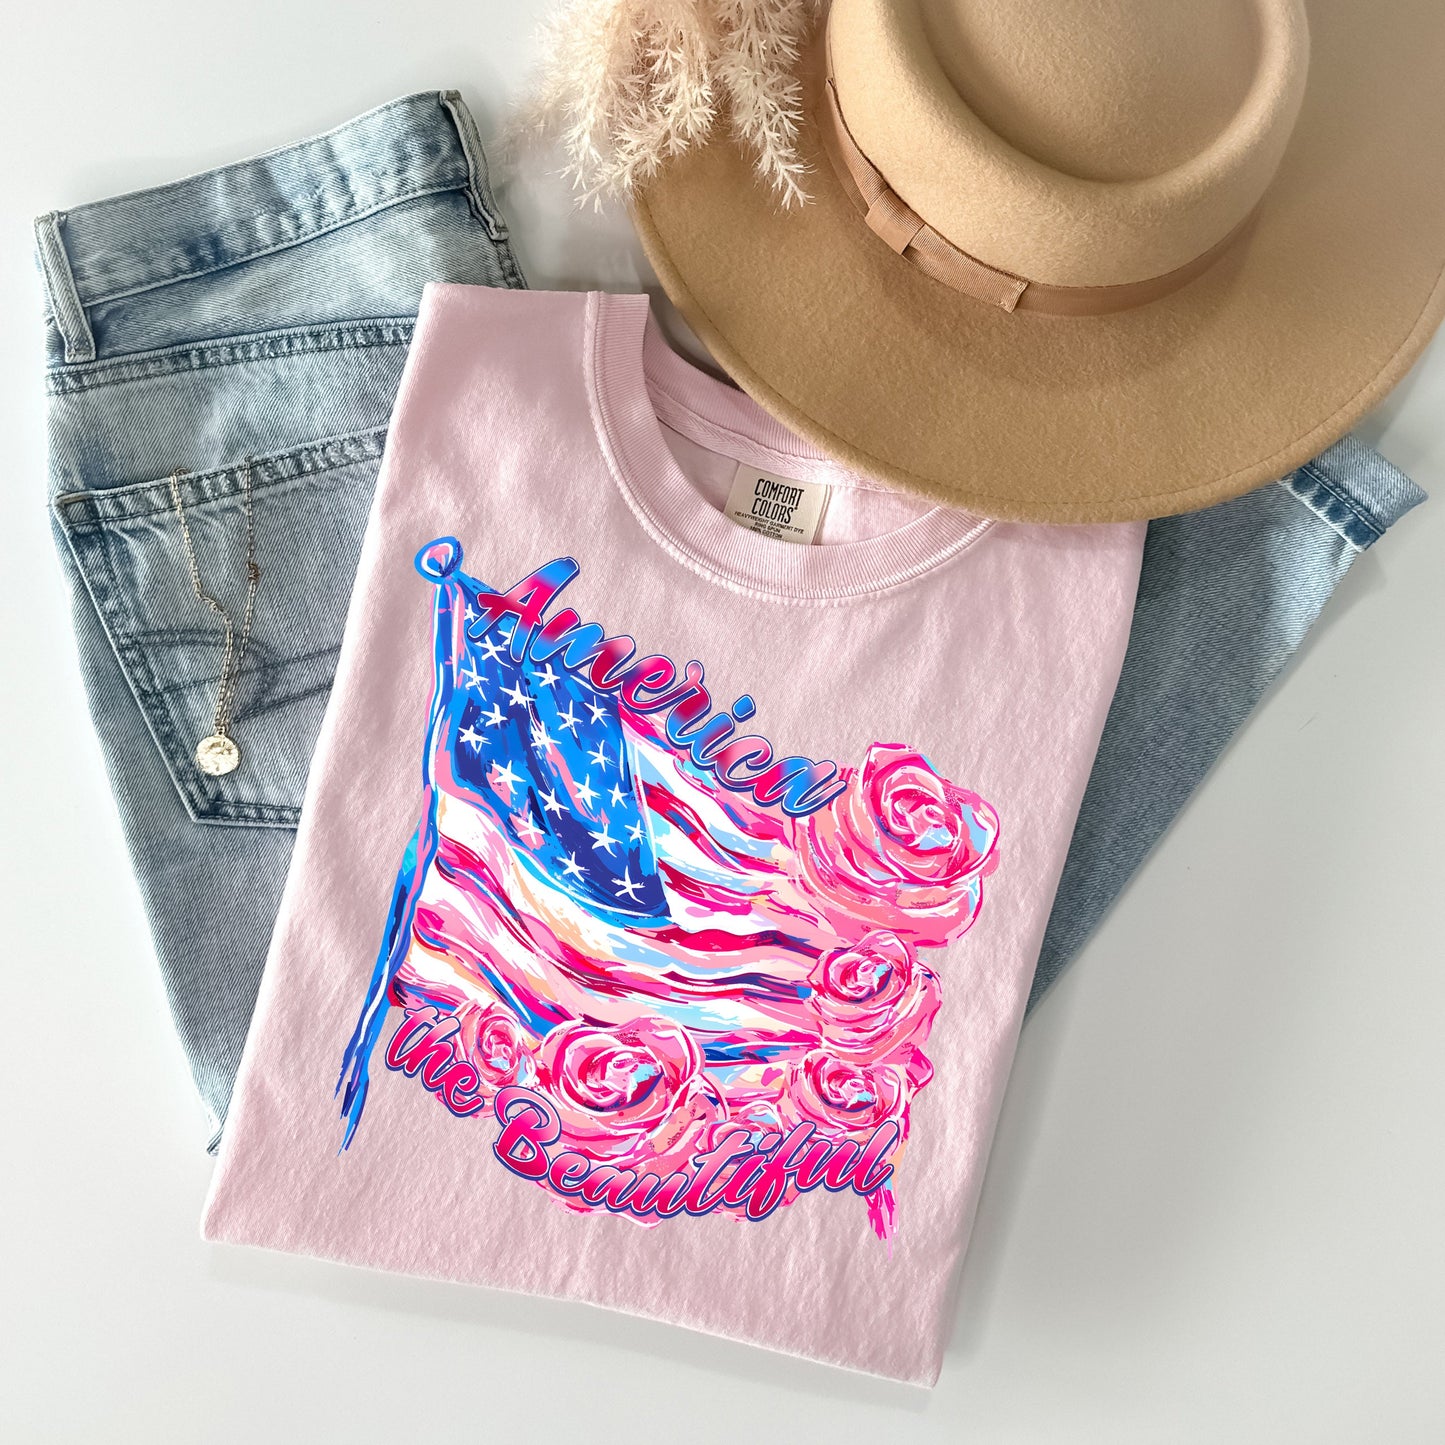 America the Beautiful - Comfort Colors Graphic Tee